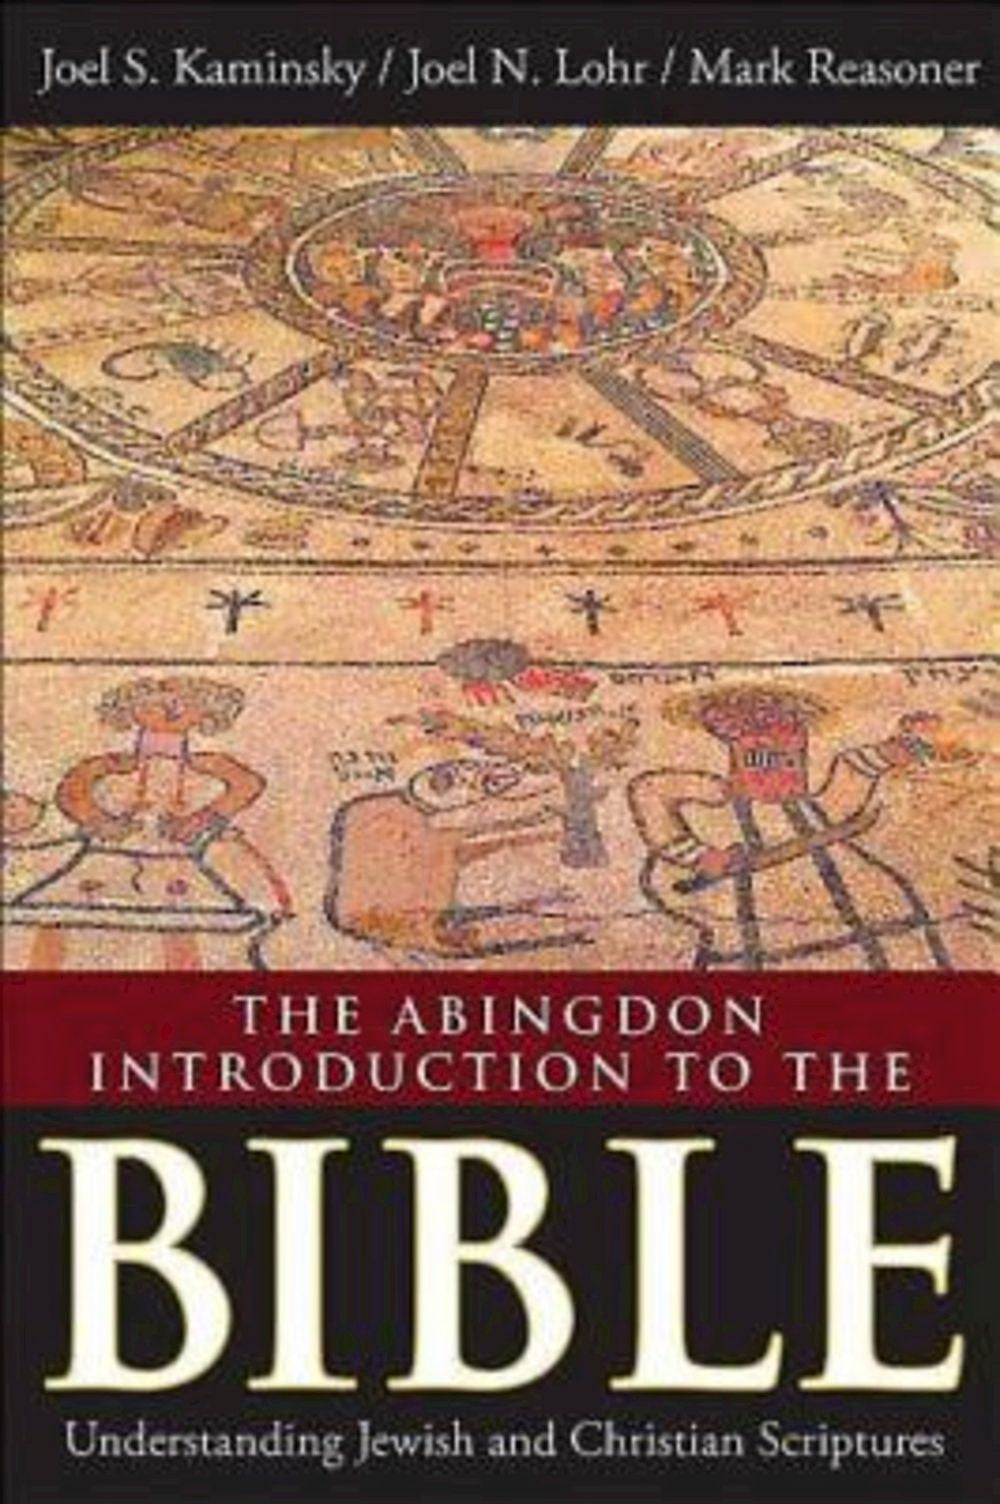 Image of The Abingdon Introduction to the Bible other